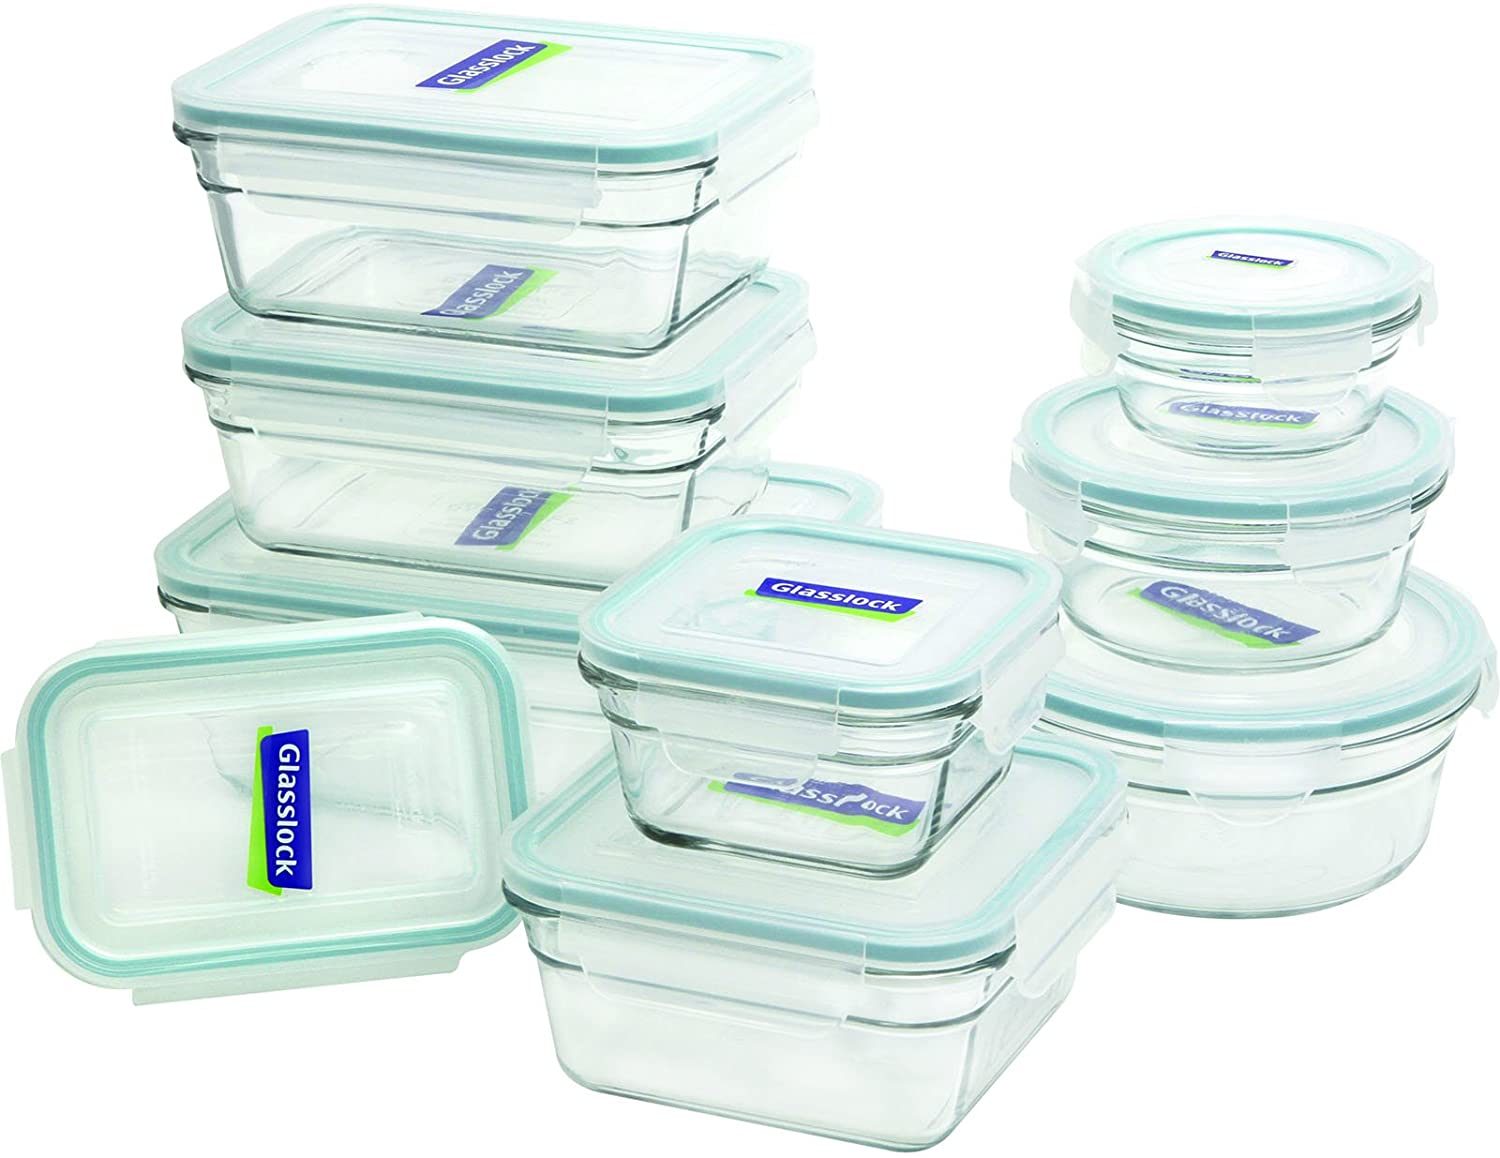 Utopia Kitchen 18 Pieces Plastic Food Containers Set (9 Containers and